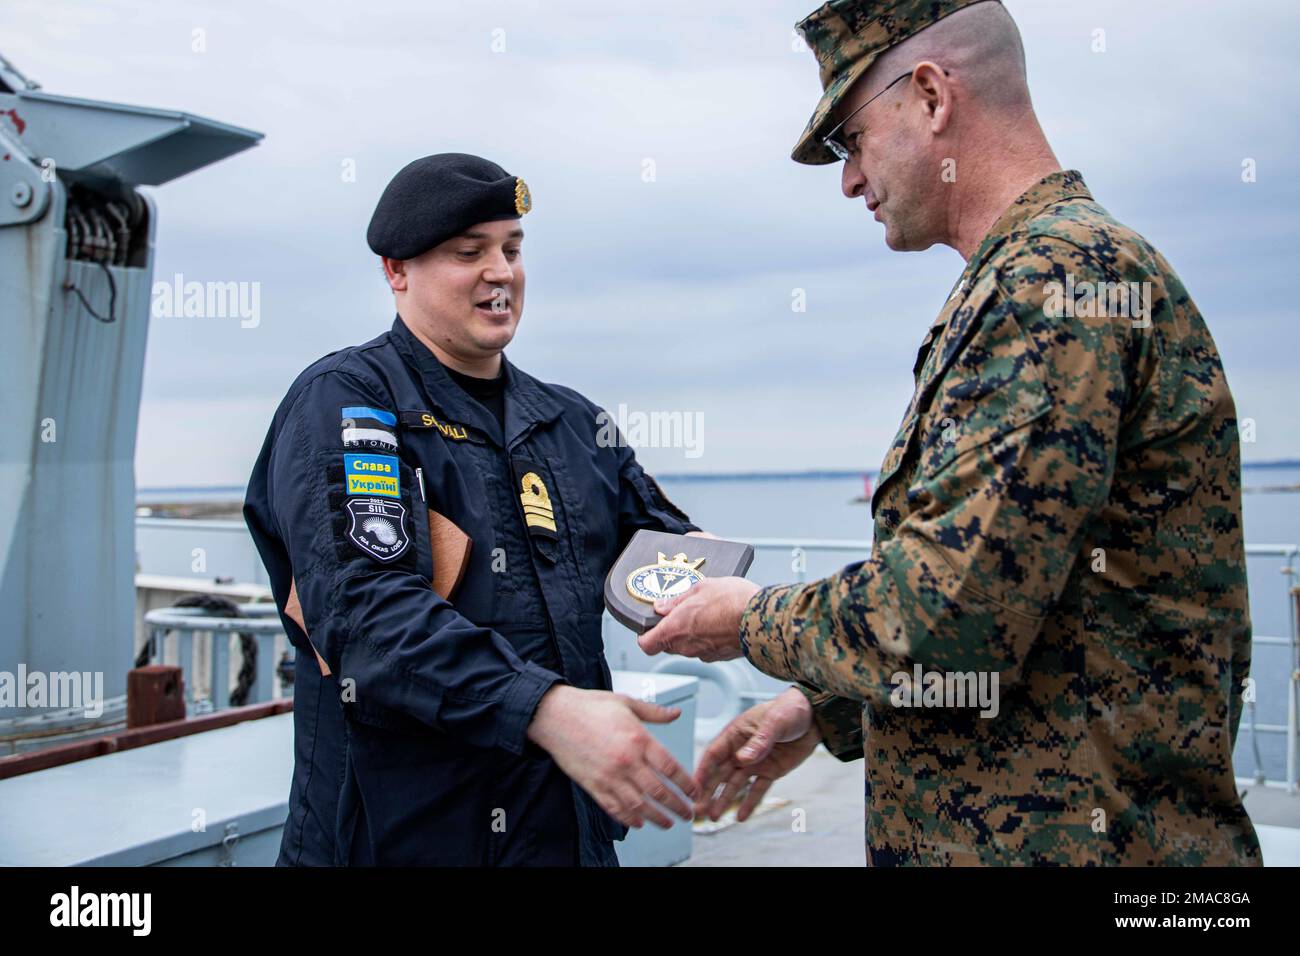 Lieutenant Senior Grade Krister Soovali, captain of the ENS Wambola, presents a gift to Col. Robert Hallett, the Commander of Task Group 61/2.4, the deputy commander for Task Force 61/2, and assistant division commander for 2d Marine Division, aboard the ENS Wambola for the Marine's participation in enhancing Maritime Domain Awareness during Exercise Hedgehog near Tallinn, Estonia, May 25, 2022. Task Group 61/2.4 provides naval and joint force commanders with dedicated multi-domain reconnaissance and counter-reconnaissance (RXR) capabilities. Task Force 61/2 is executing the Commandant of the Stock Photo